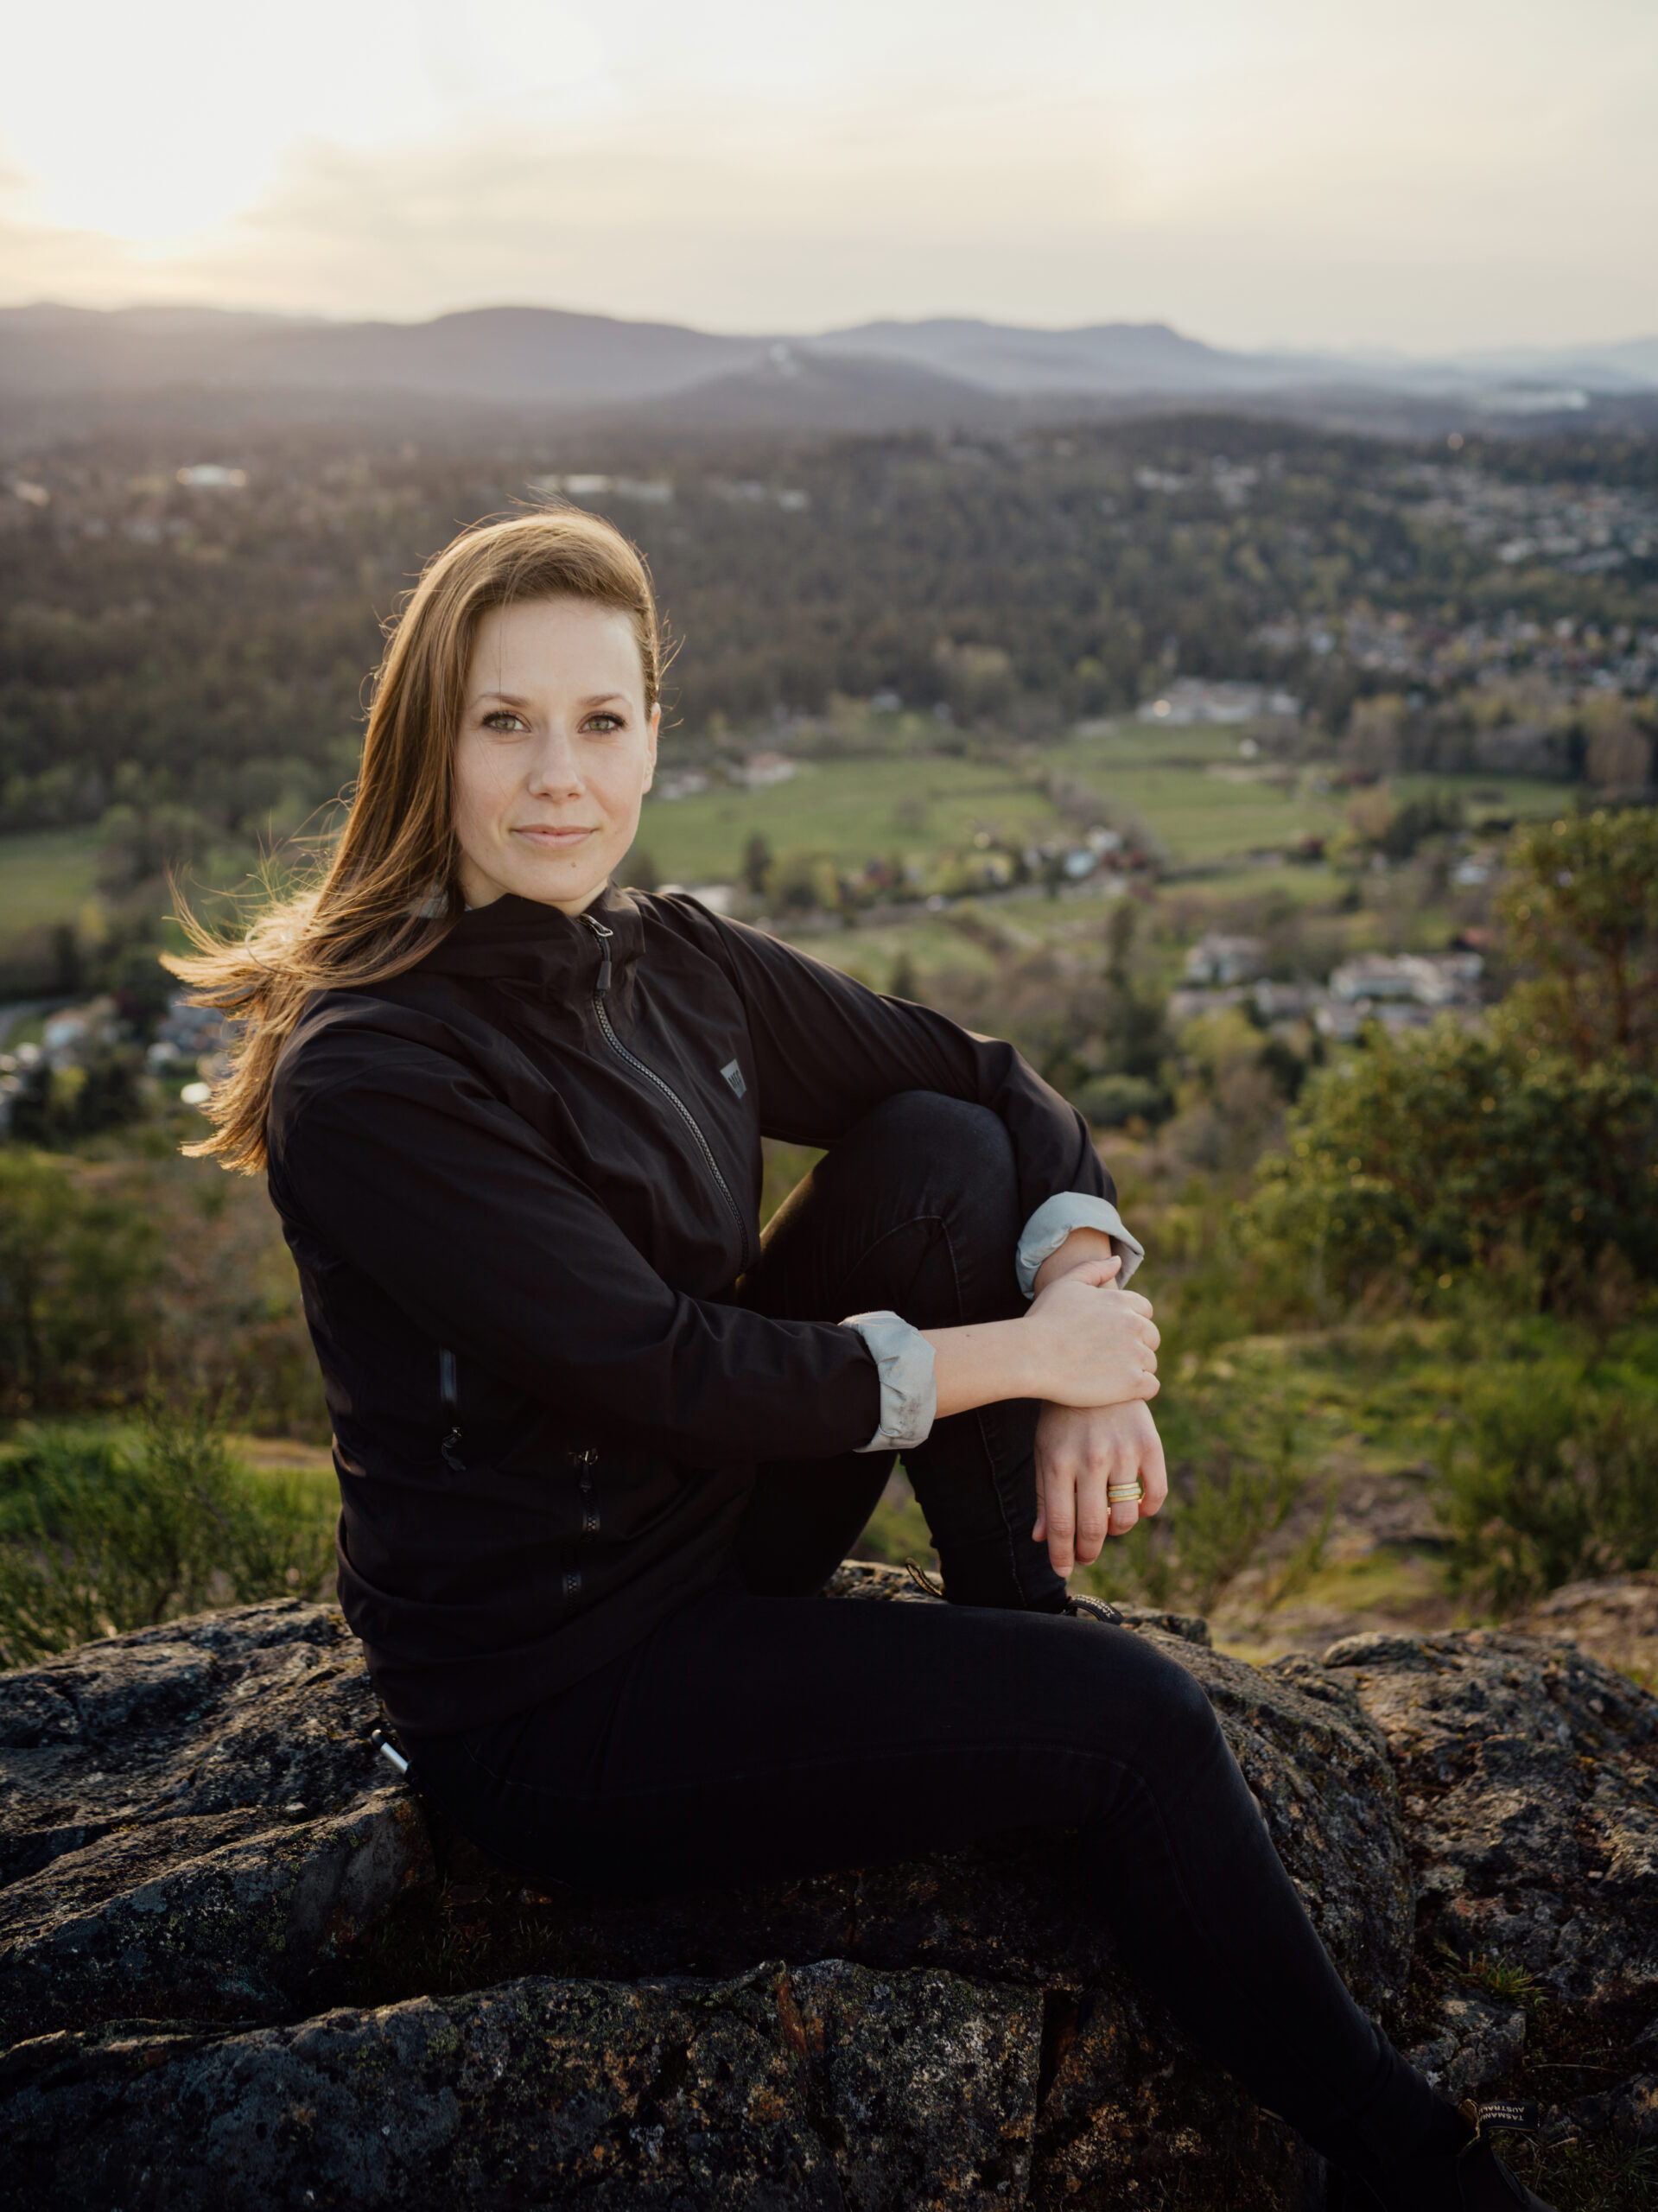 A woman in a black jacket sitting on a rocky outcrop